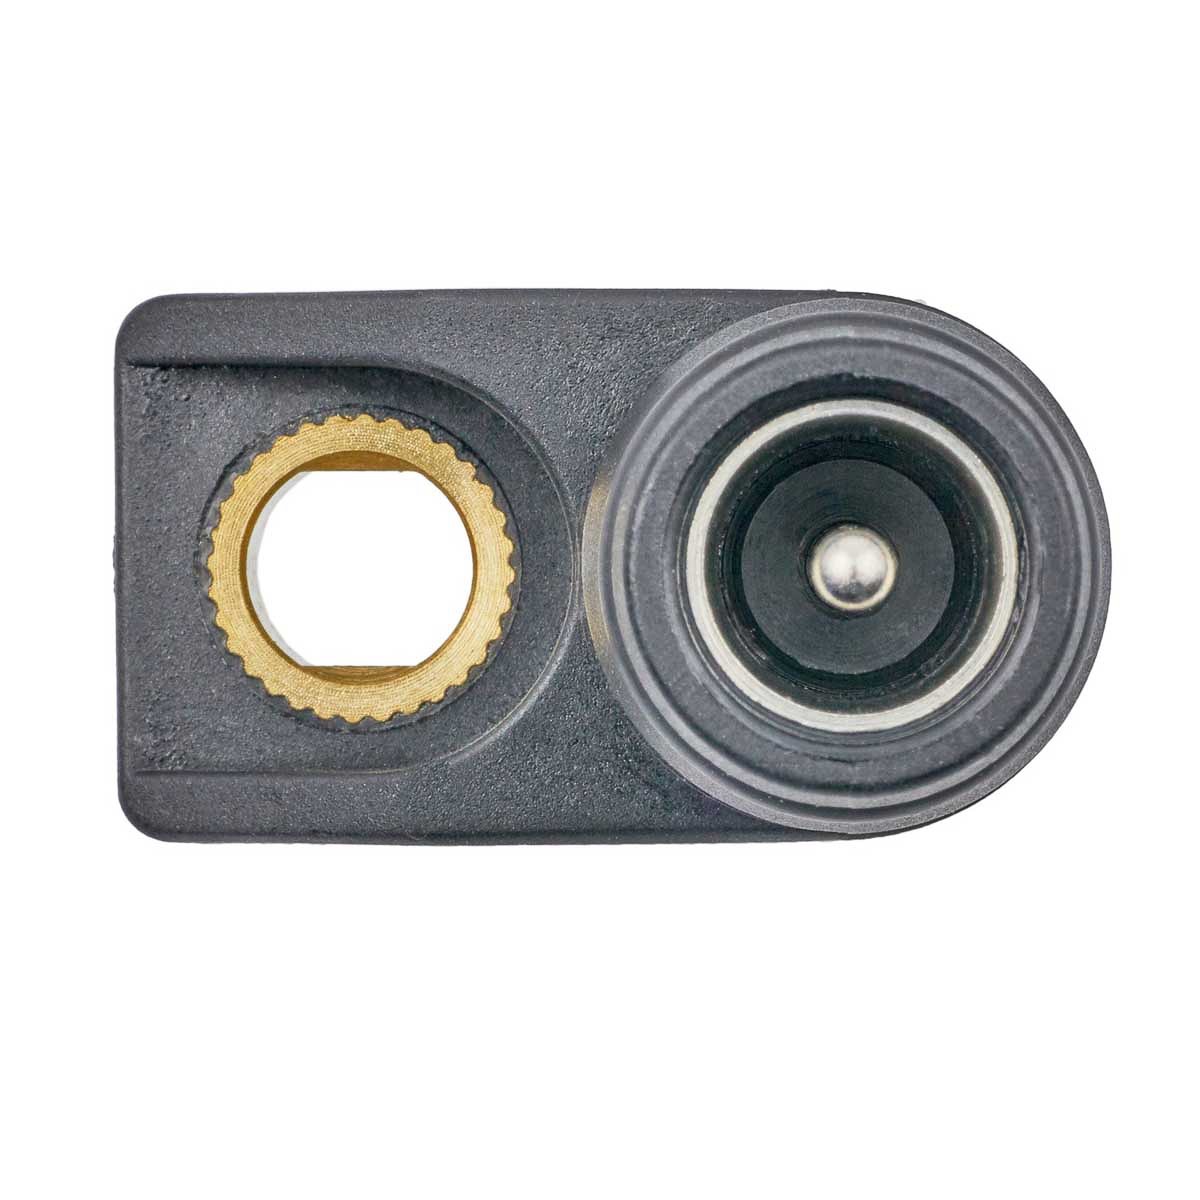 MEYLE 0148990042 RPM sensor 2-pin connector, Inductive Sensor, with seal ring, without cable, ORIGINAL Quality